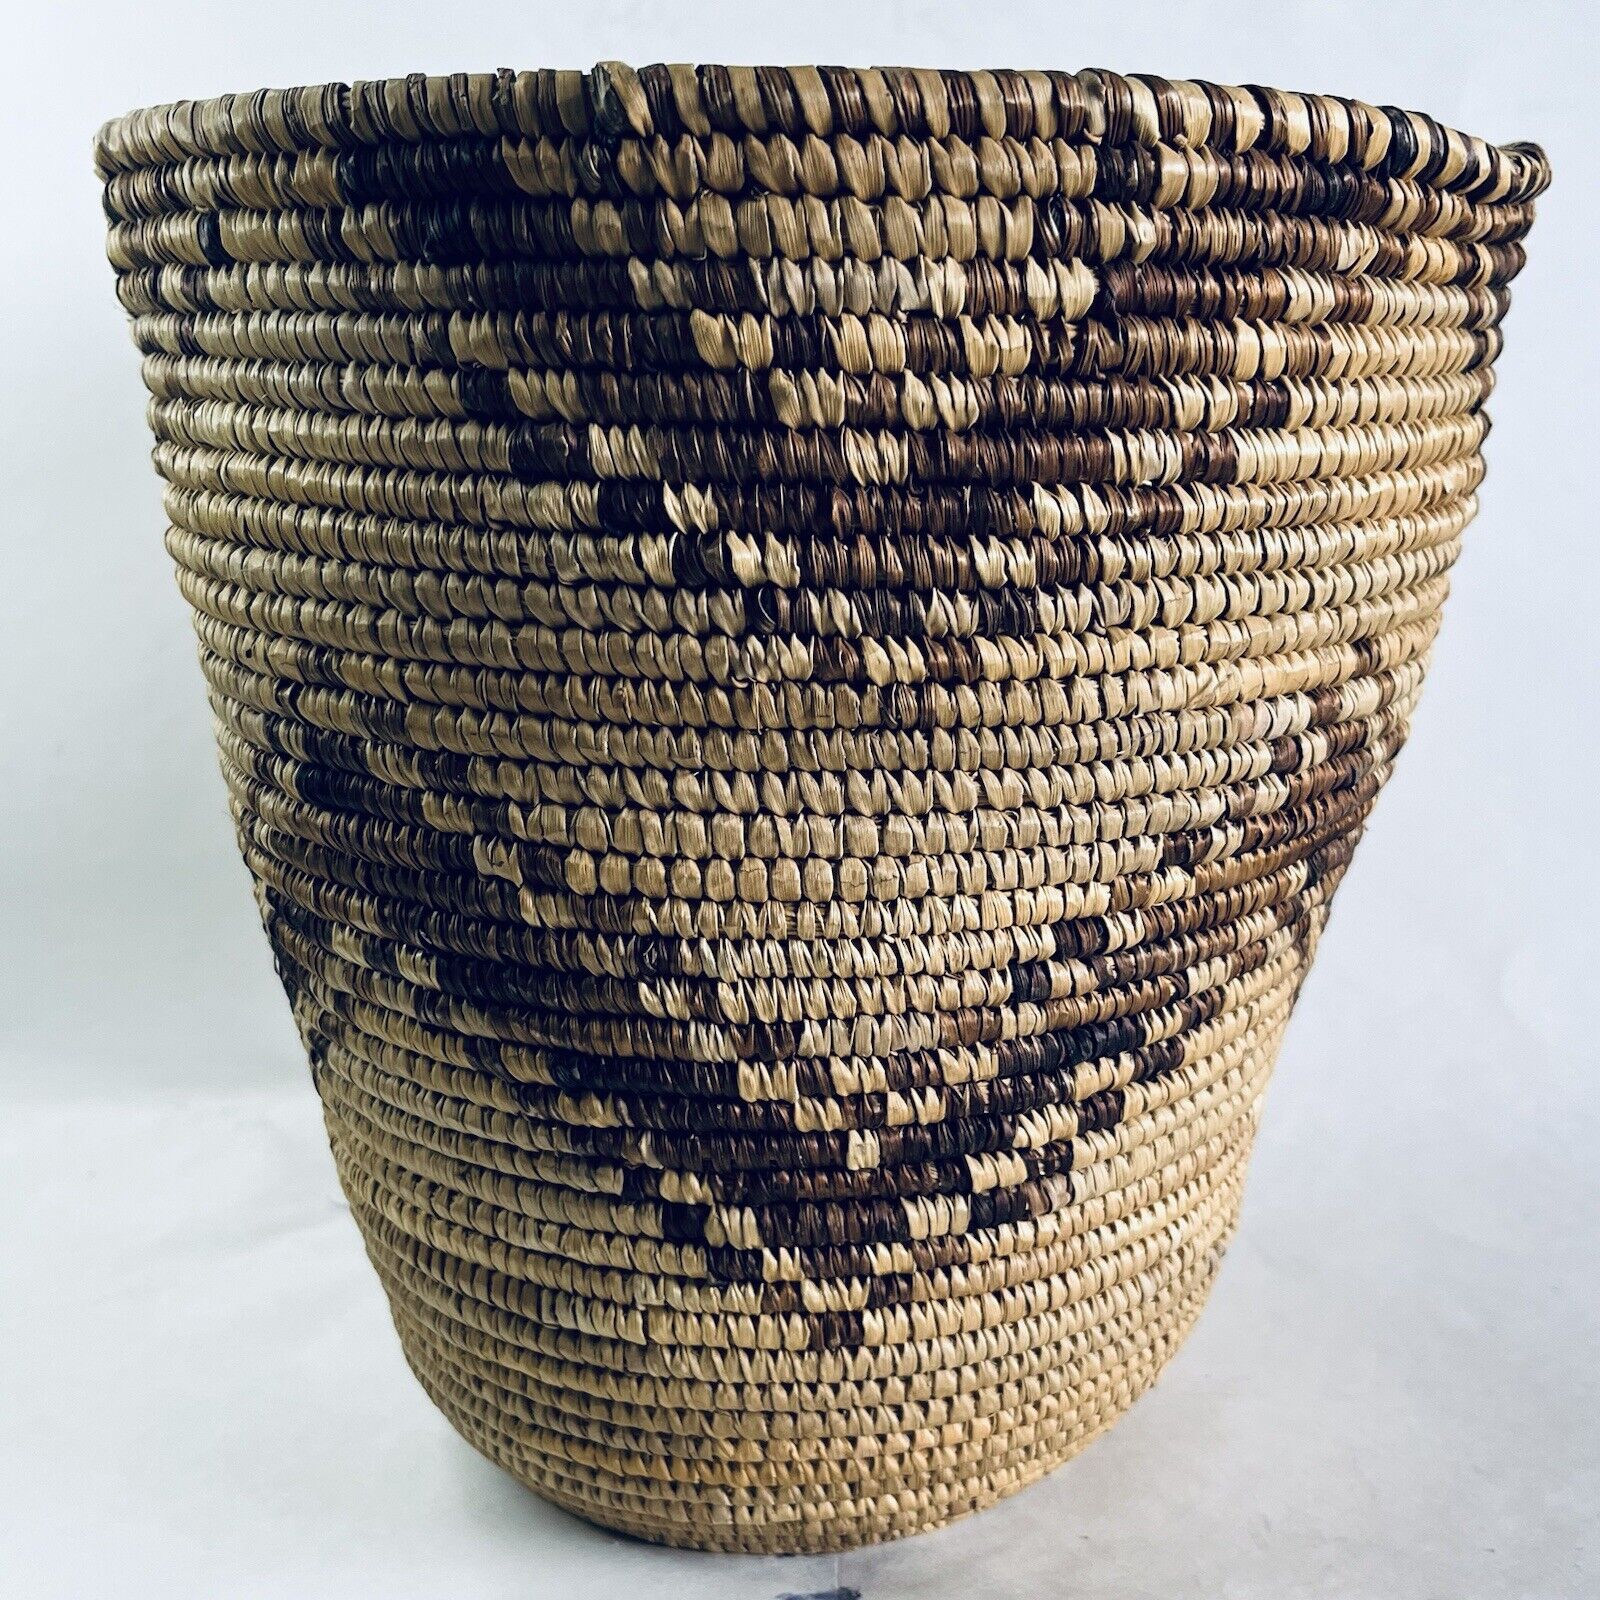 Vintage West African Hand Made Natural Rattan Woven Decorative Basket 8.5” Tall